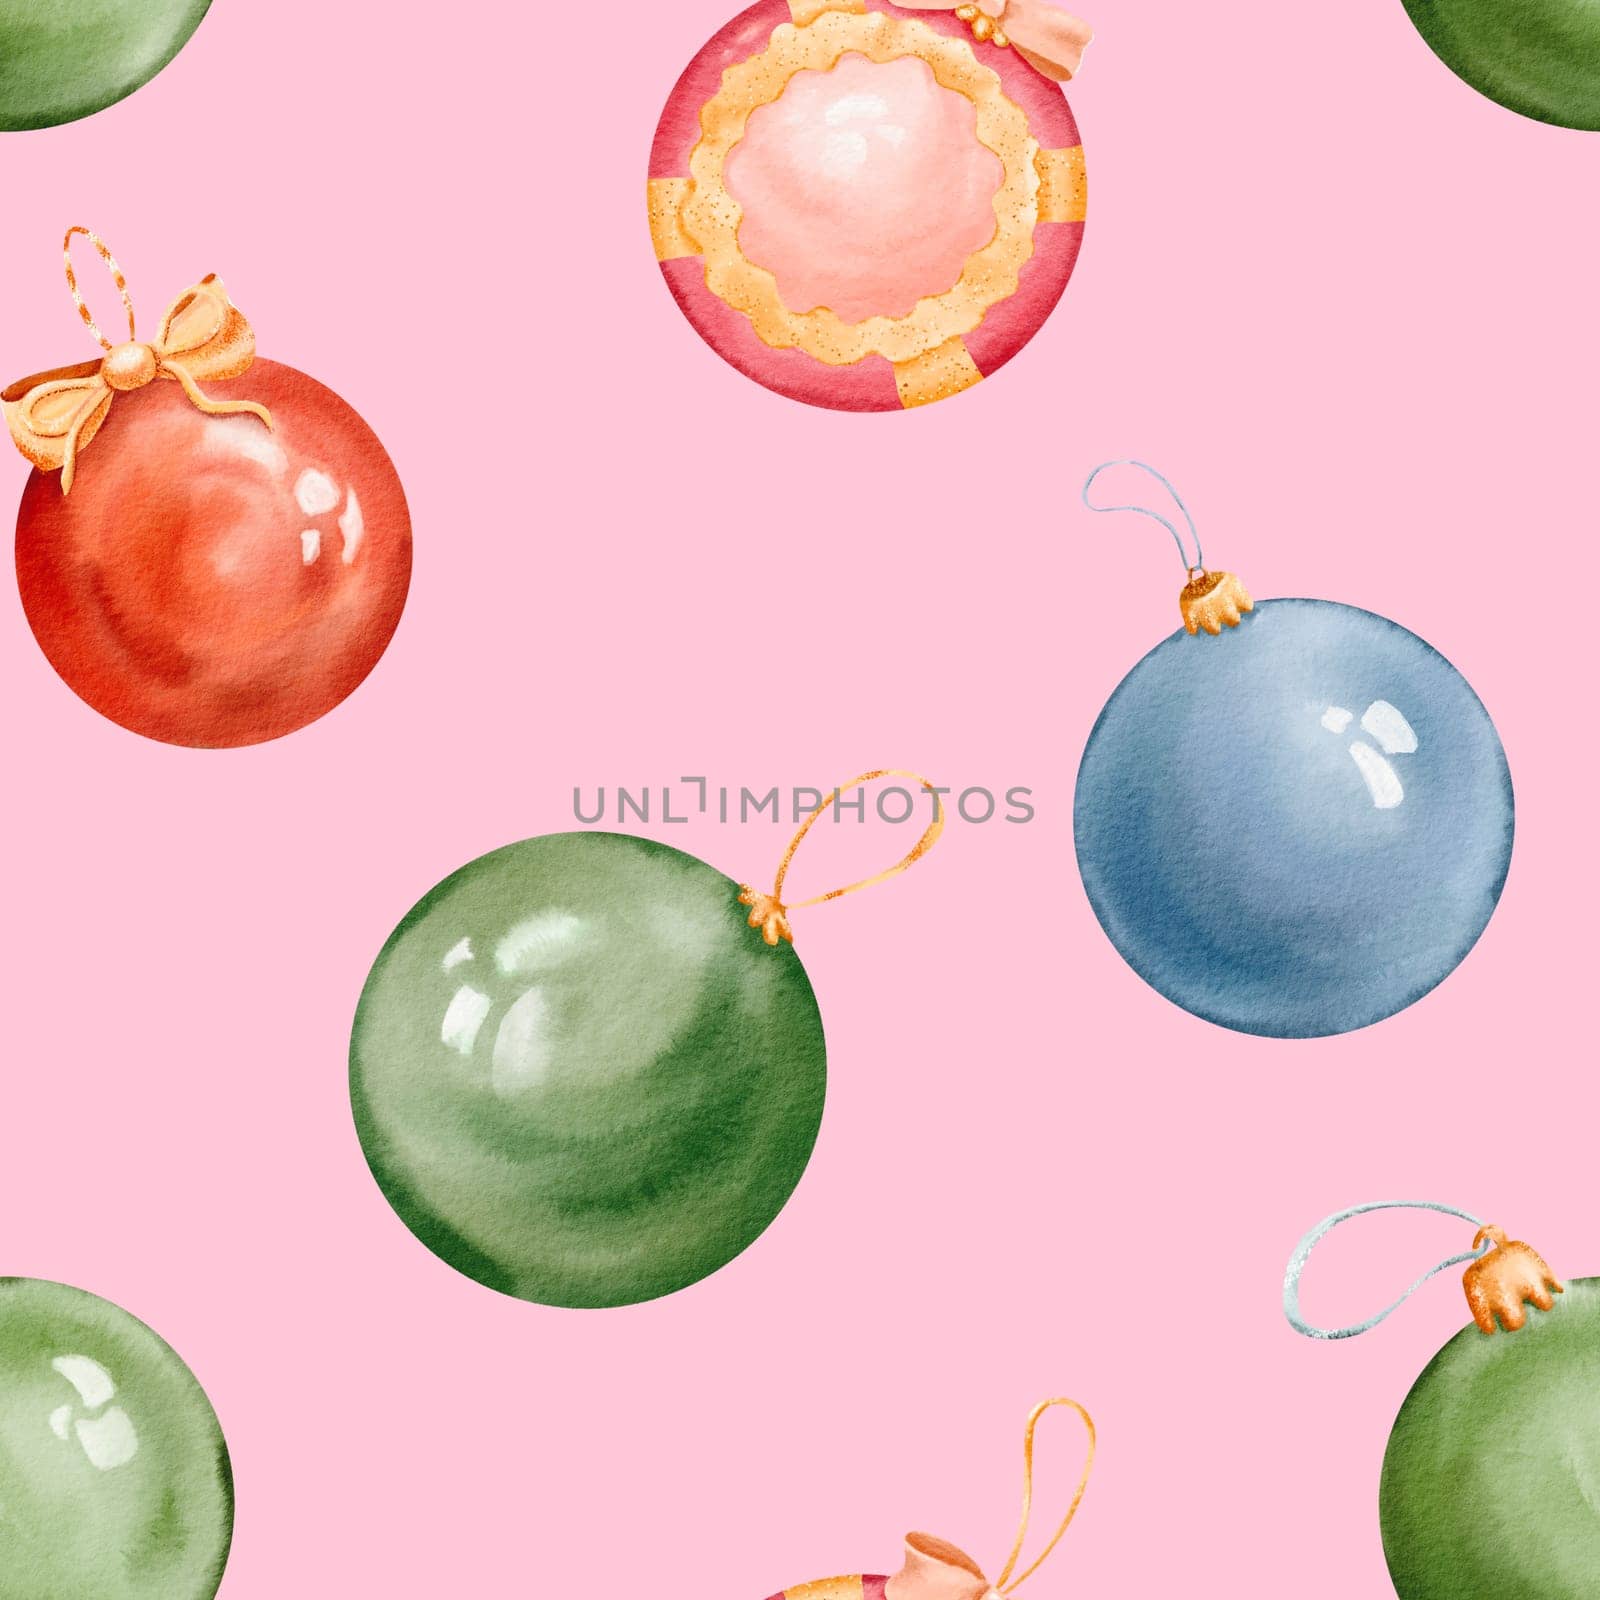 Seamless pattern of christmas balls hand made insolated watercolor illustration. winter season. decorative Pink background for pine tree, greeting card, bauble decorations. New Year holiday circle by Art_Mari_Ka